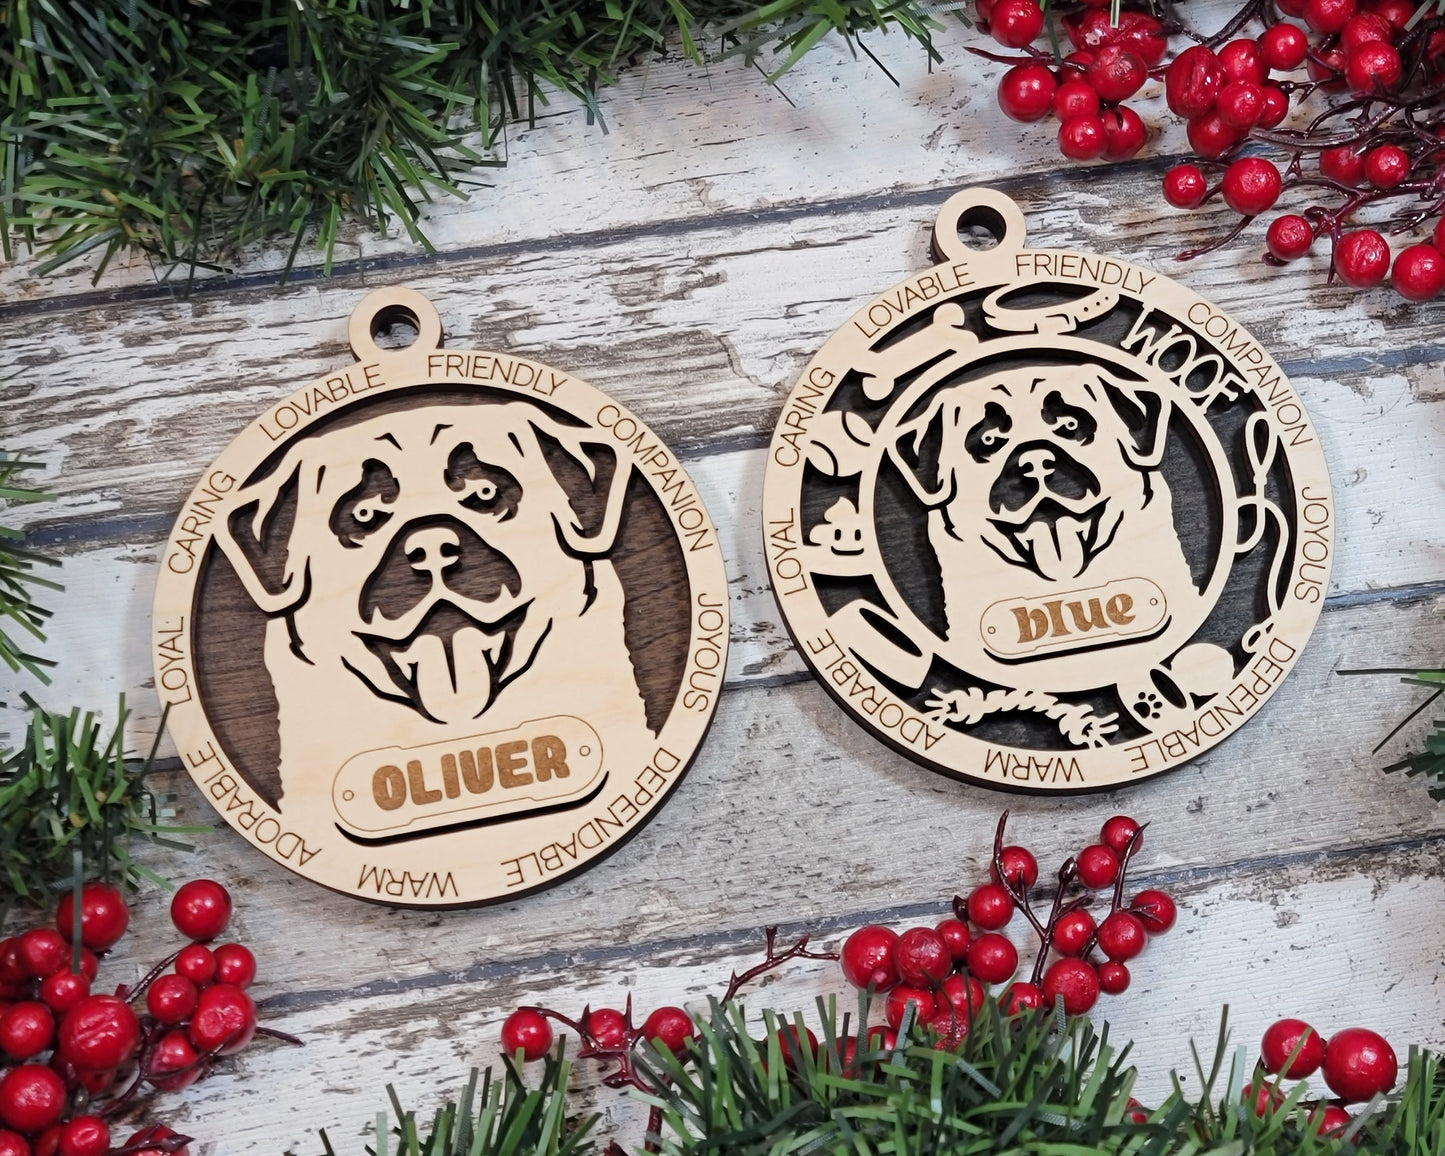 Anatolian Shepherd - Adorable Dog Ornaments - 2 Ornaments included - SVG, PDF, AI File Download - Sized for Glowforge